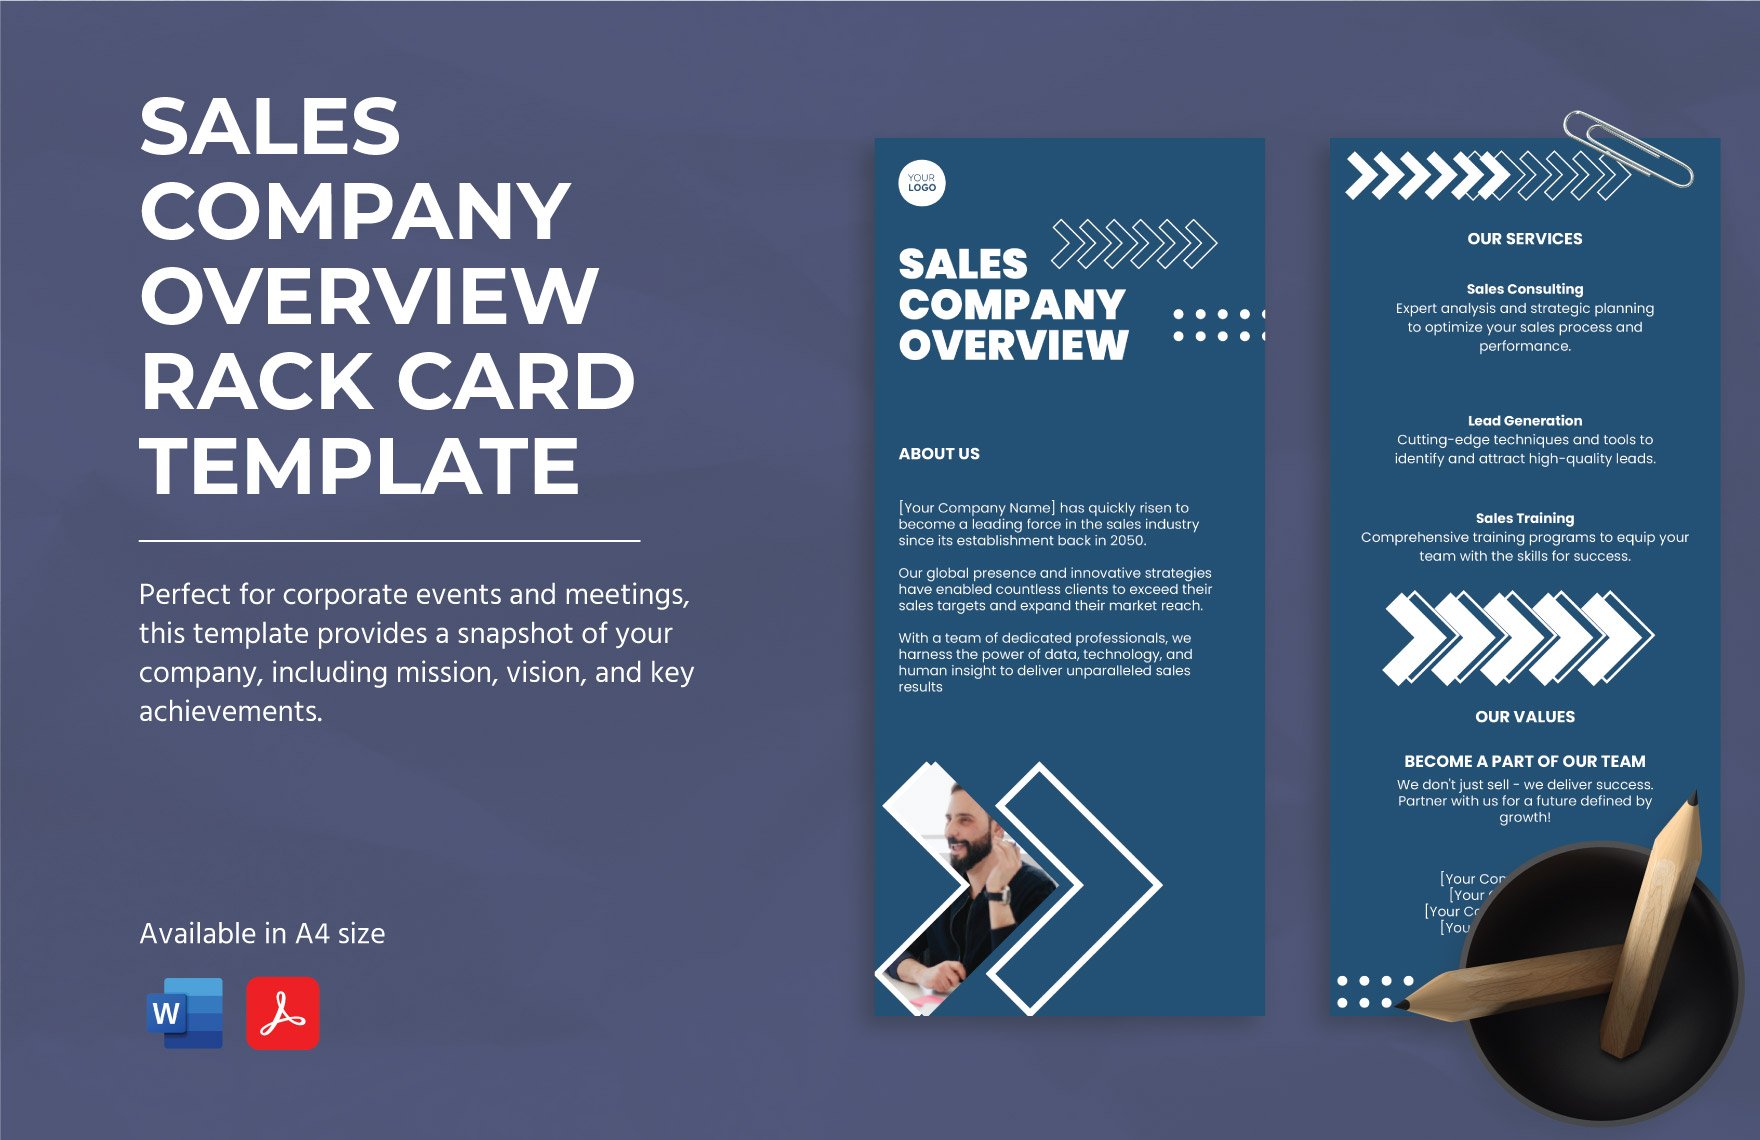 Sales Company Overview Rack Card Template